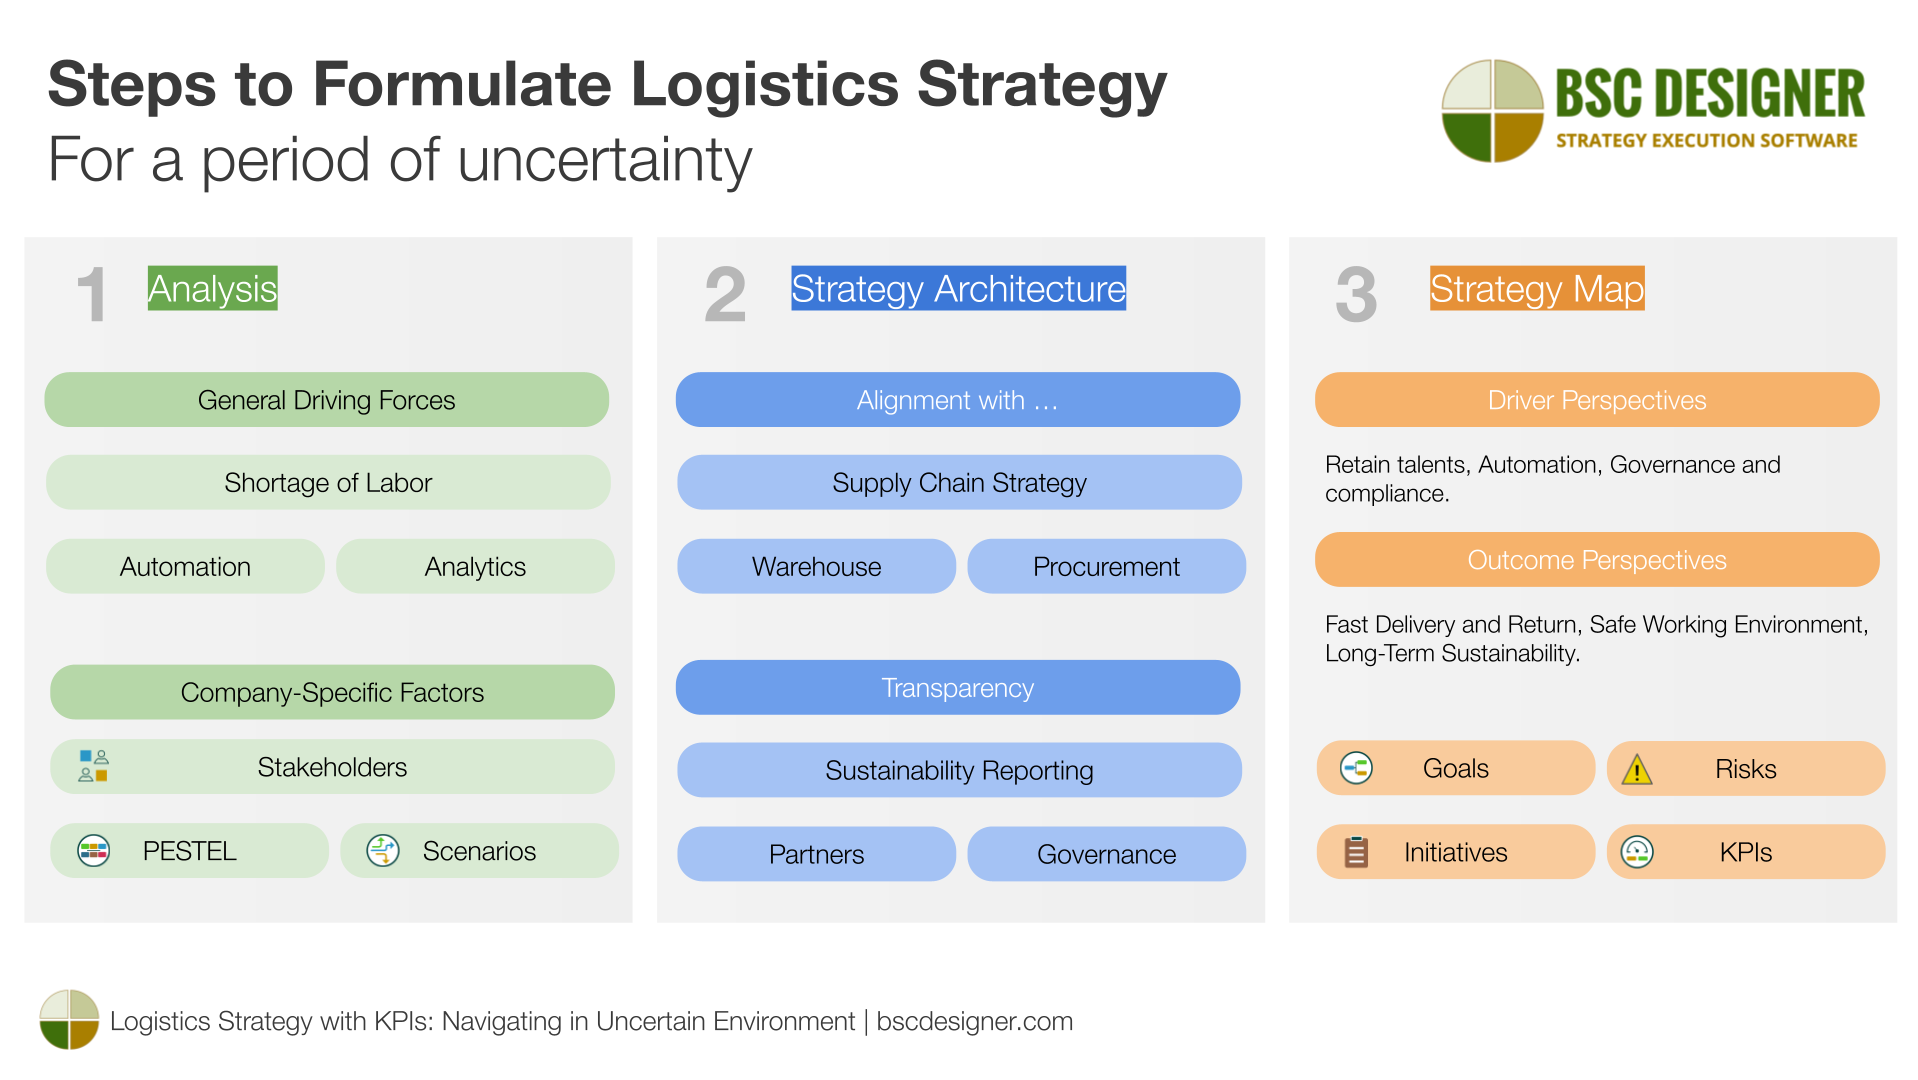 Steps to formulate logistics strategy for a period of uncertainty.